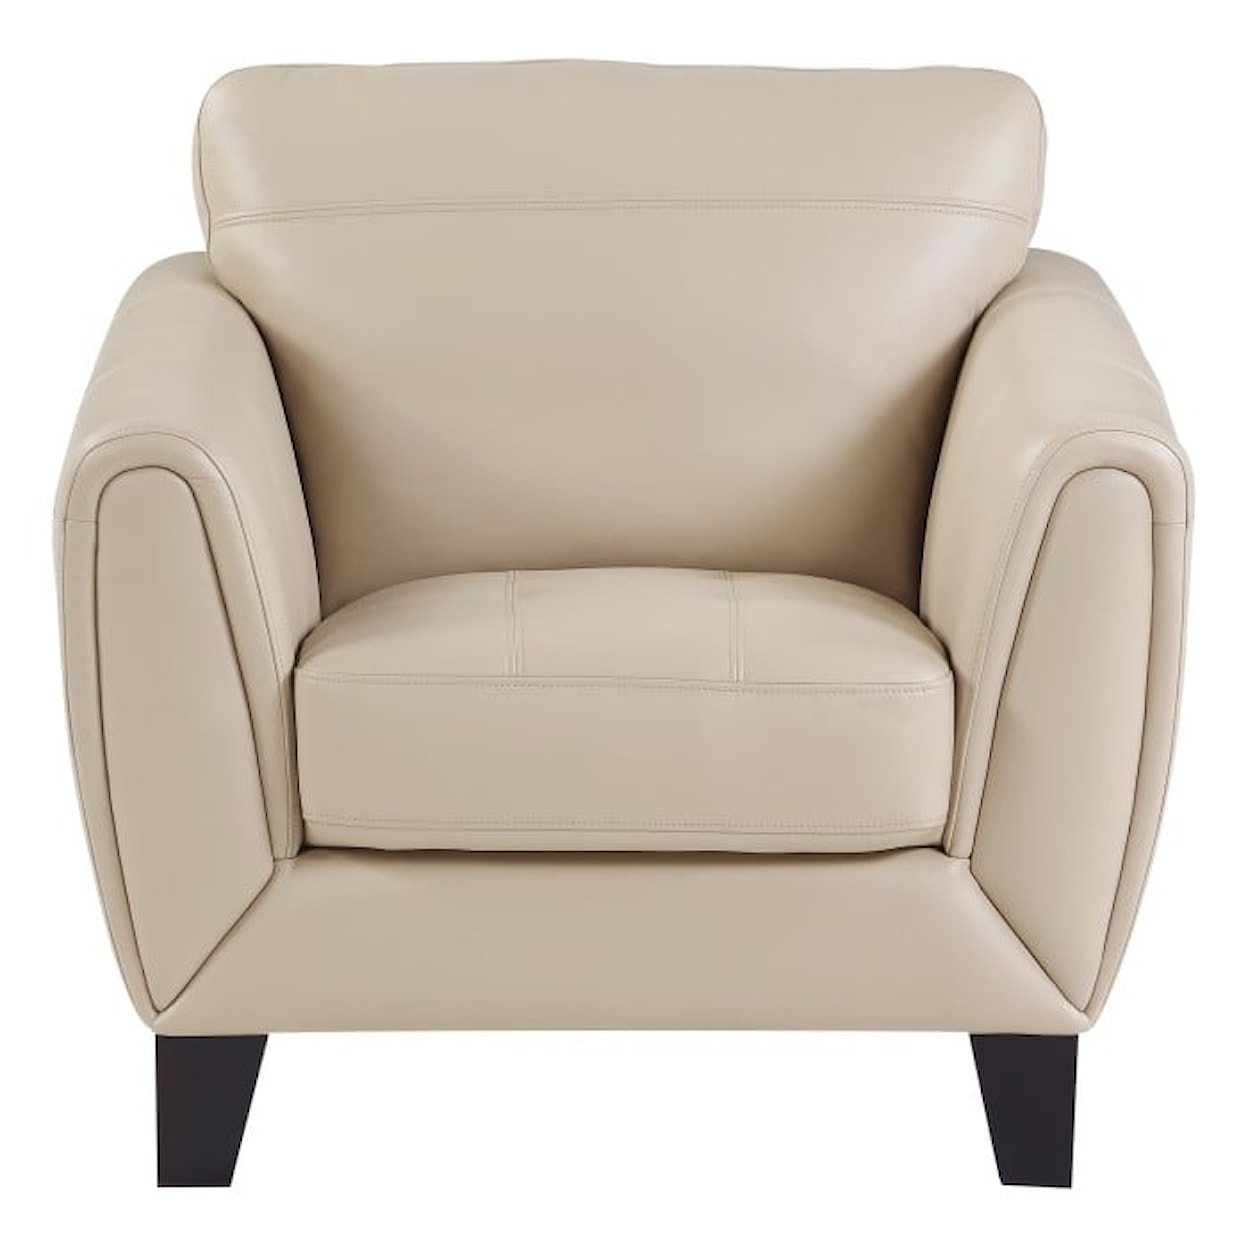 Homelegance Spivey Accent Chair